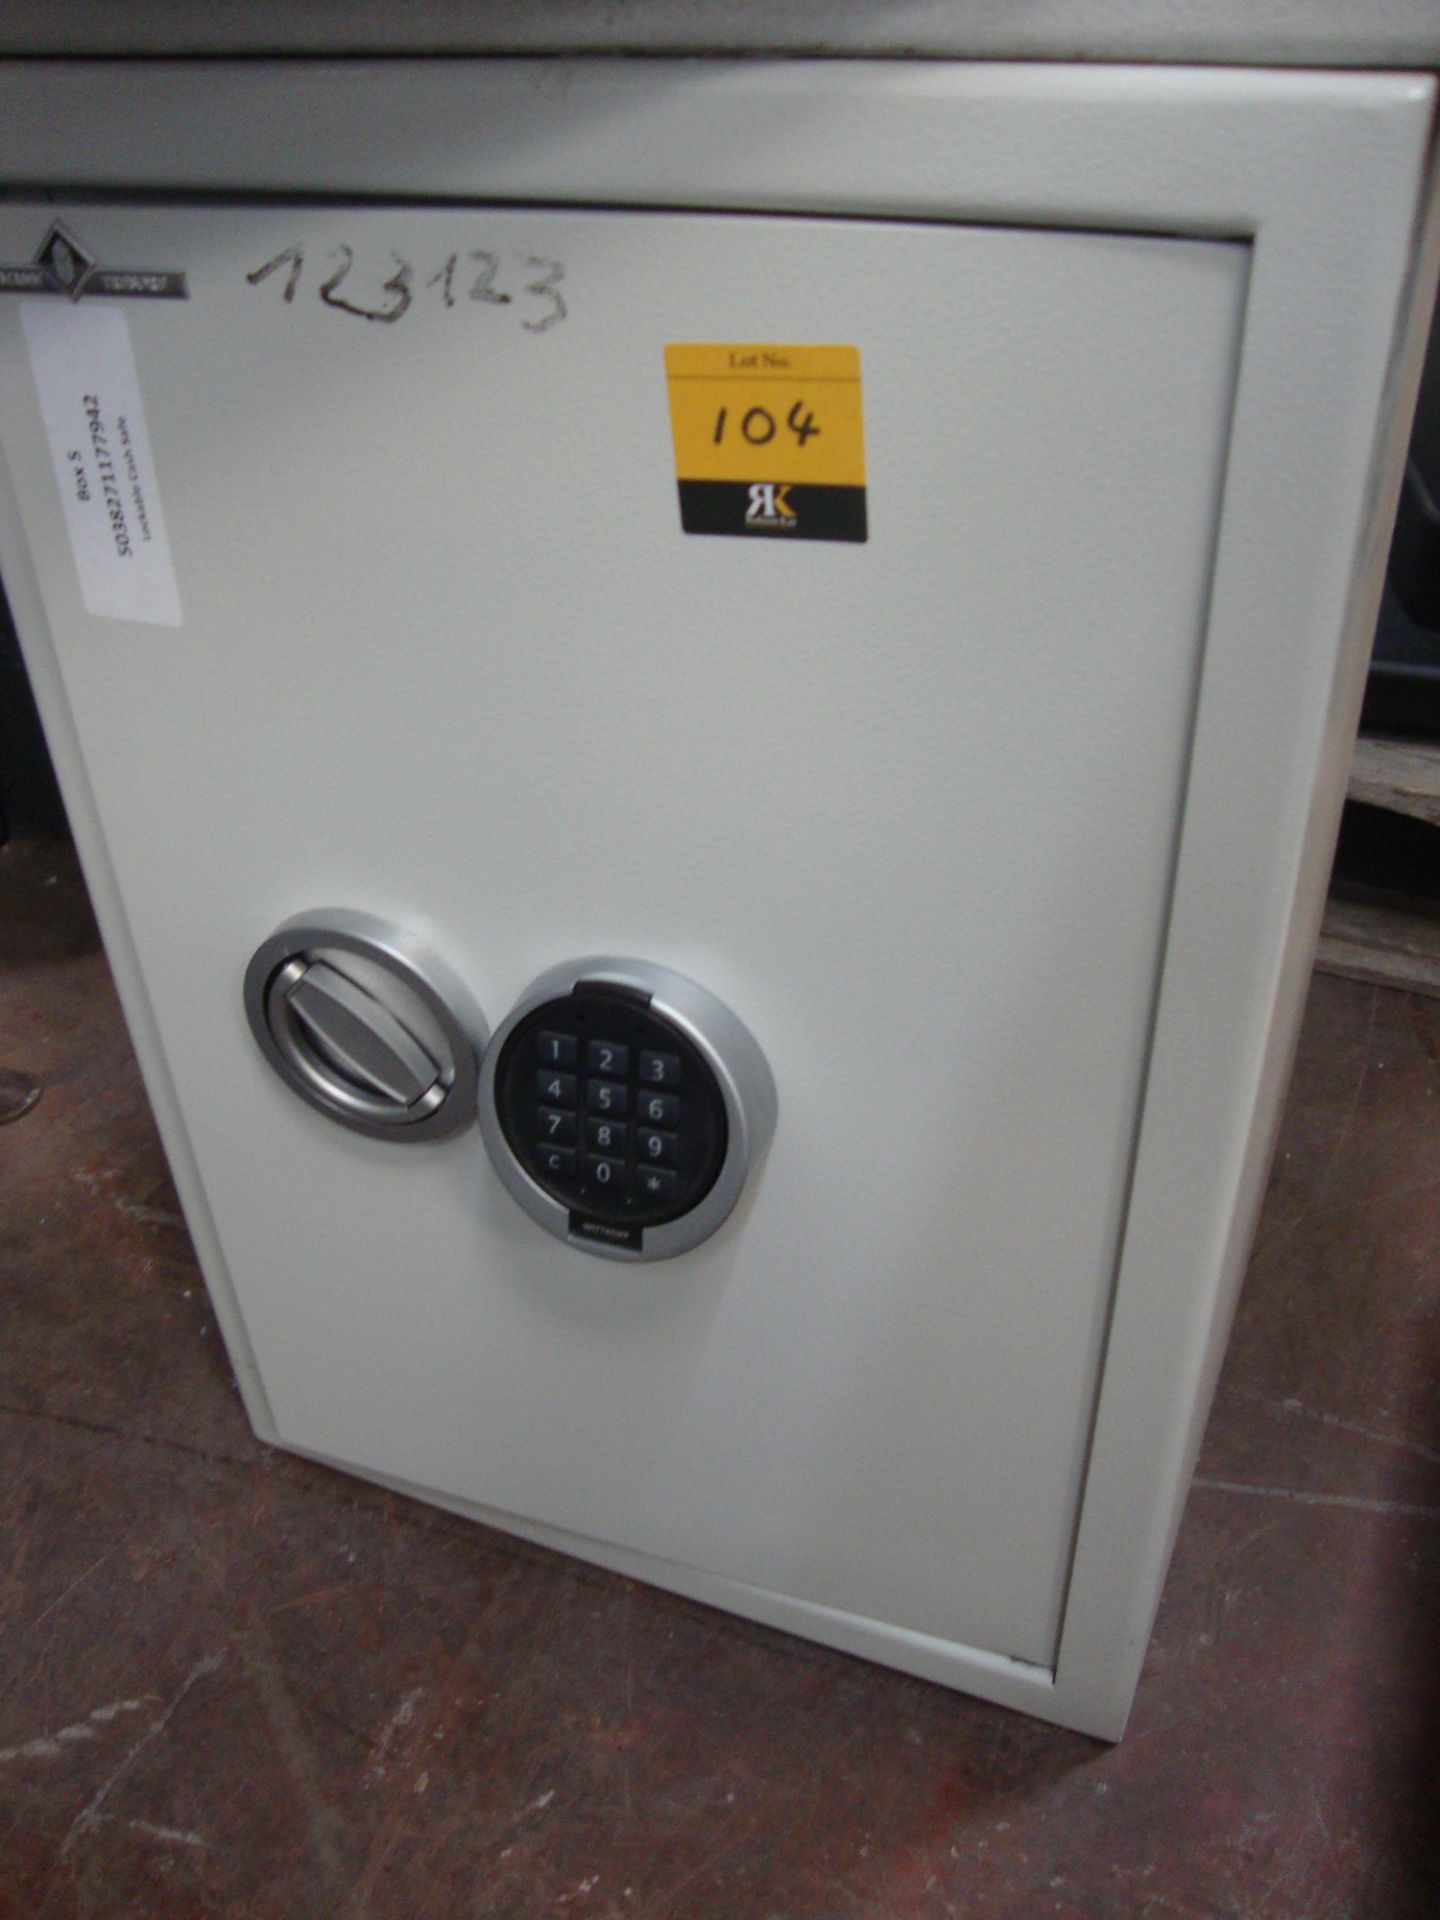 Hartmann Tresore model Bayreuth Class S2 high security safe, year of manufacture 2016. This lot